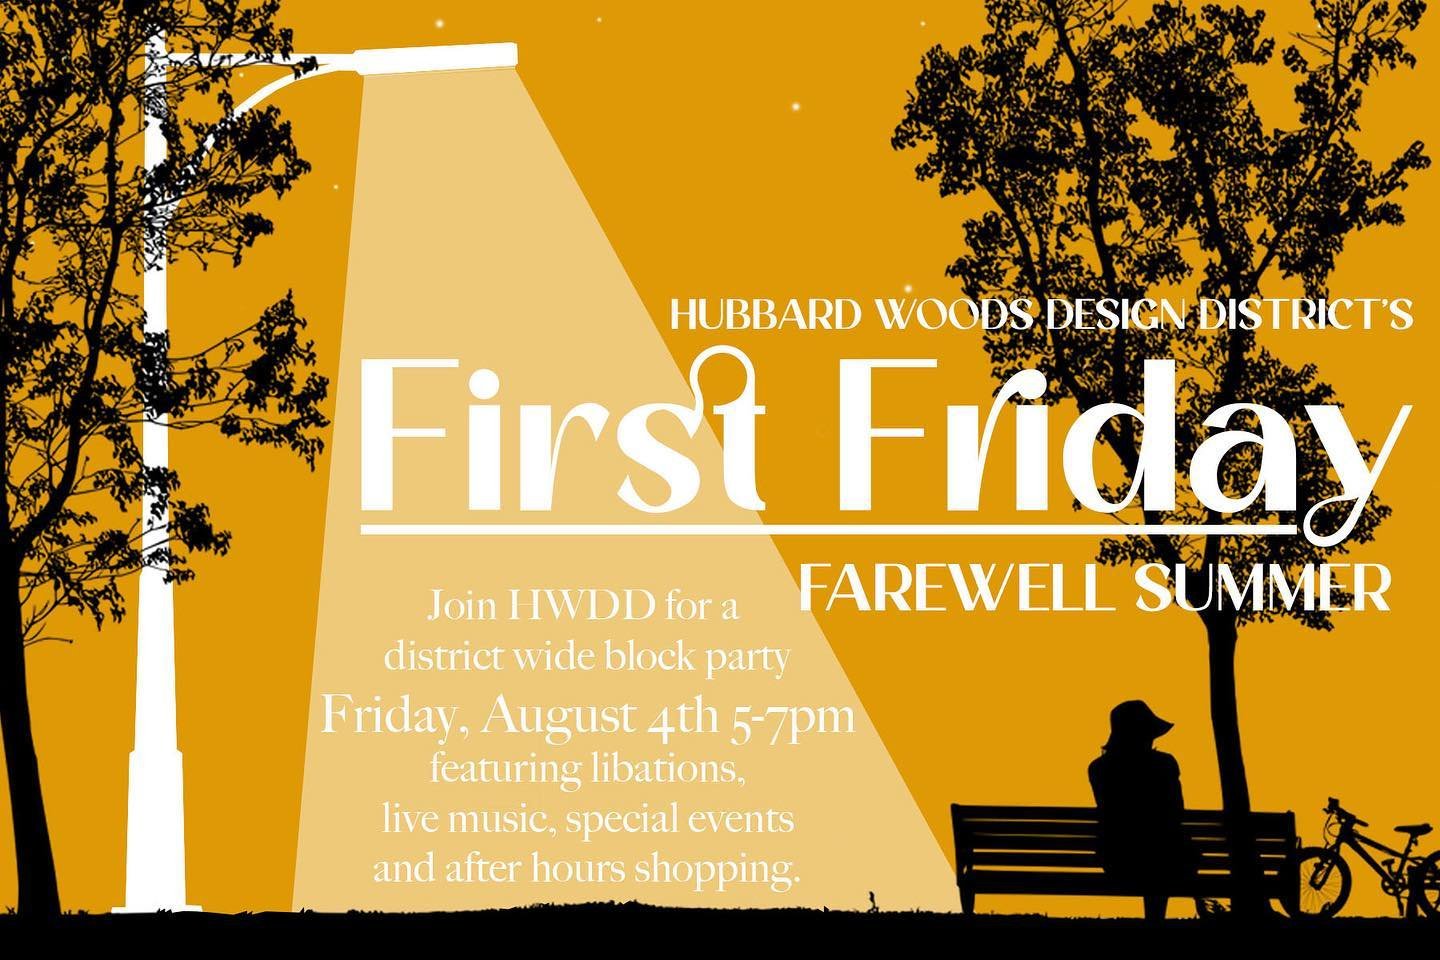 It&rsquo;s First Friday again tonight in Hubbard Woods 5-7! 
.
.
.
.
#hwdd_winnetka #winnetka #chicago #firstfriday #summer #afterhours #shoplocal